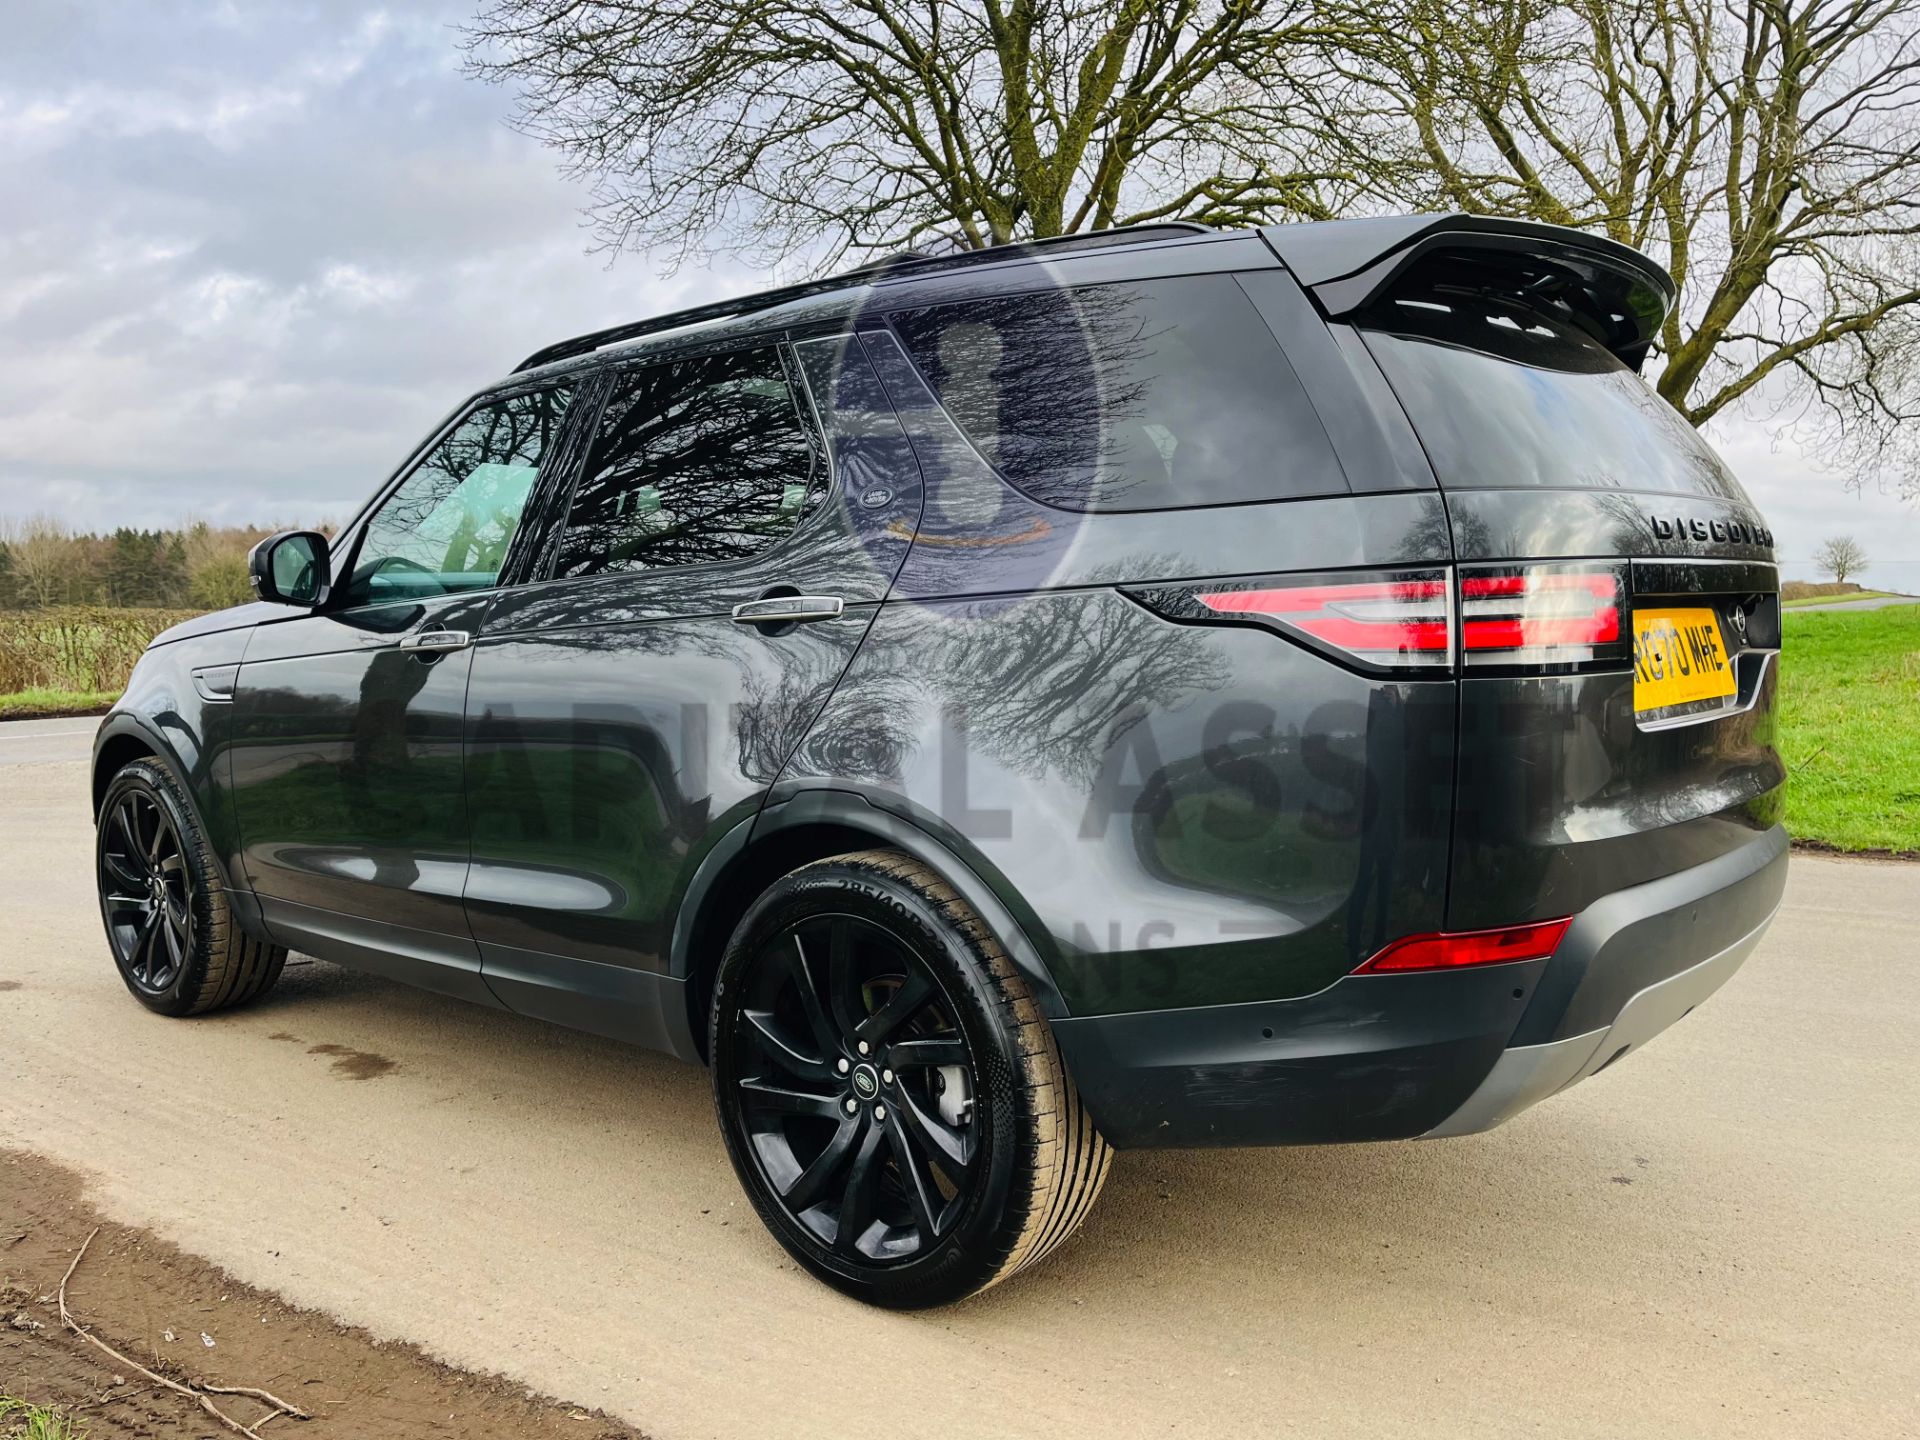 (ON SALE) LAND ROVER DISCOVERY LUXURY HSE BLACK EDITION (2021 MODEL) ONLY 26000 MILES - LR HISTORY - Image 9 of 43